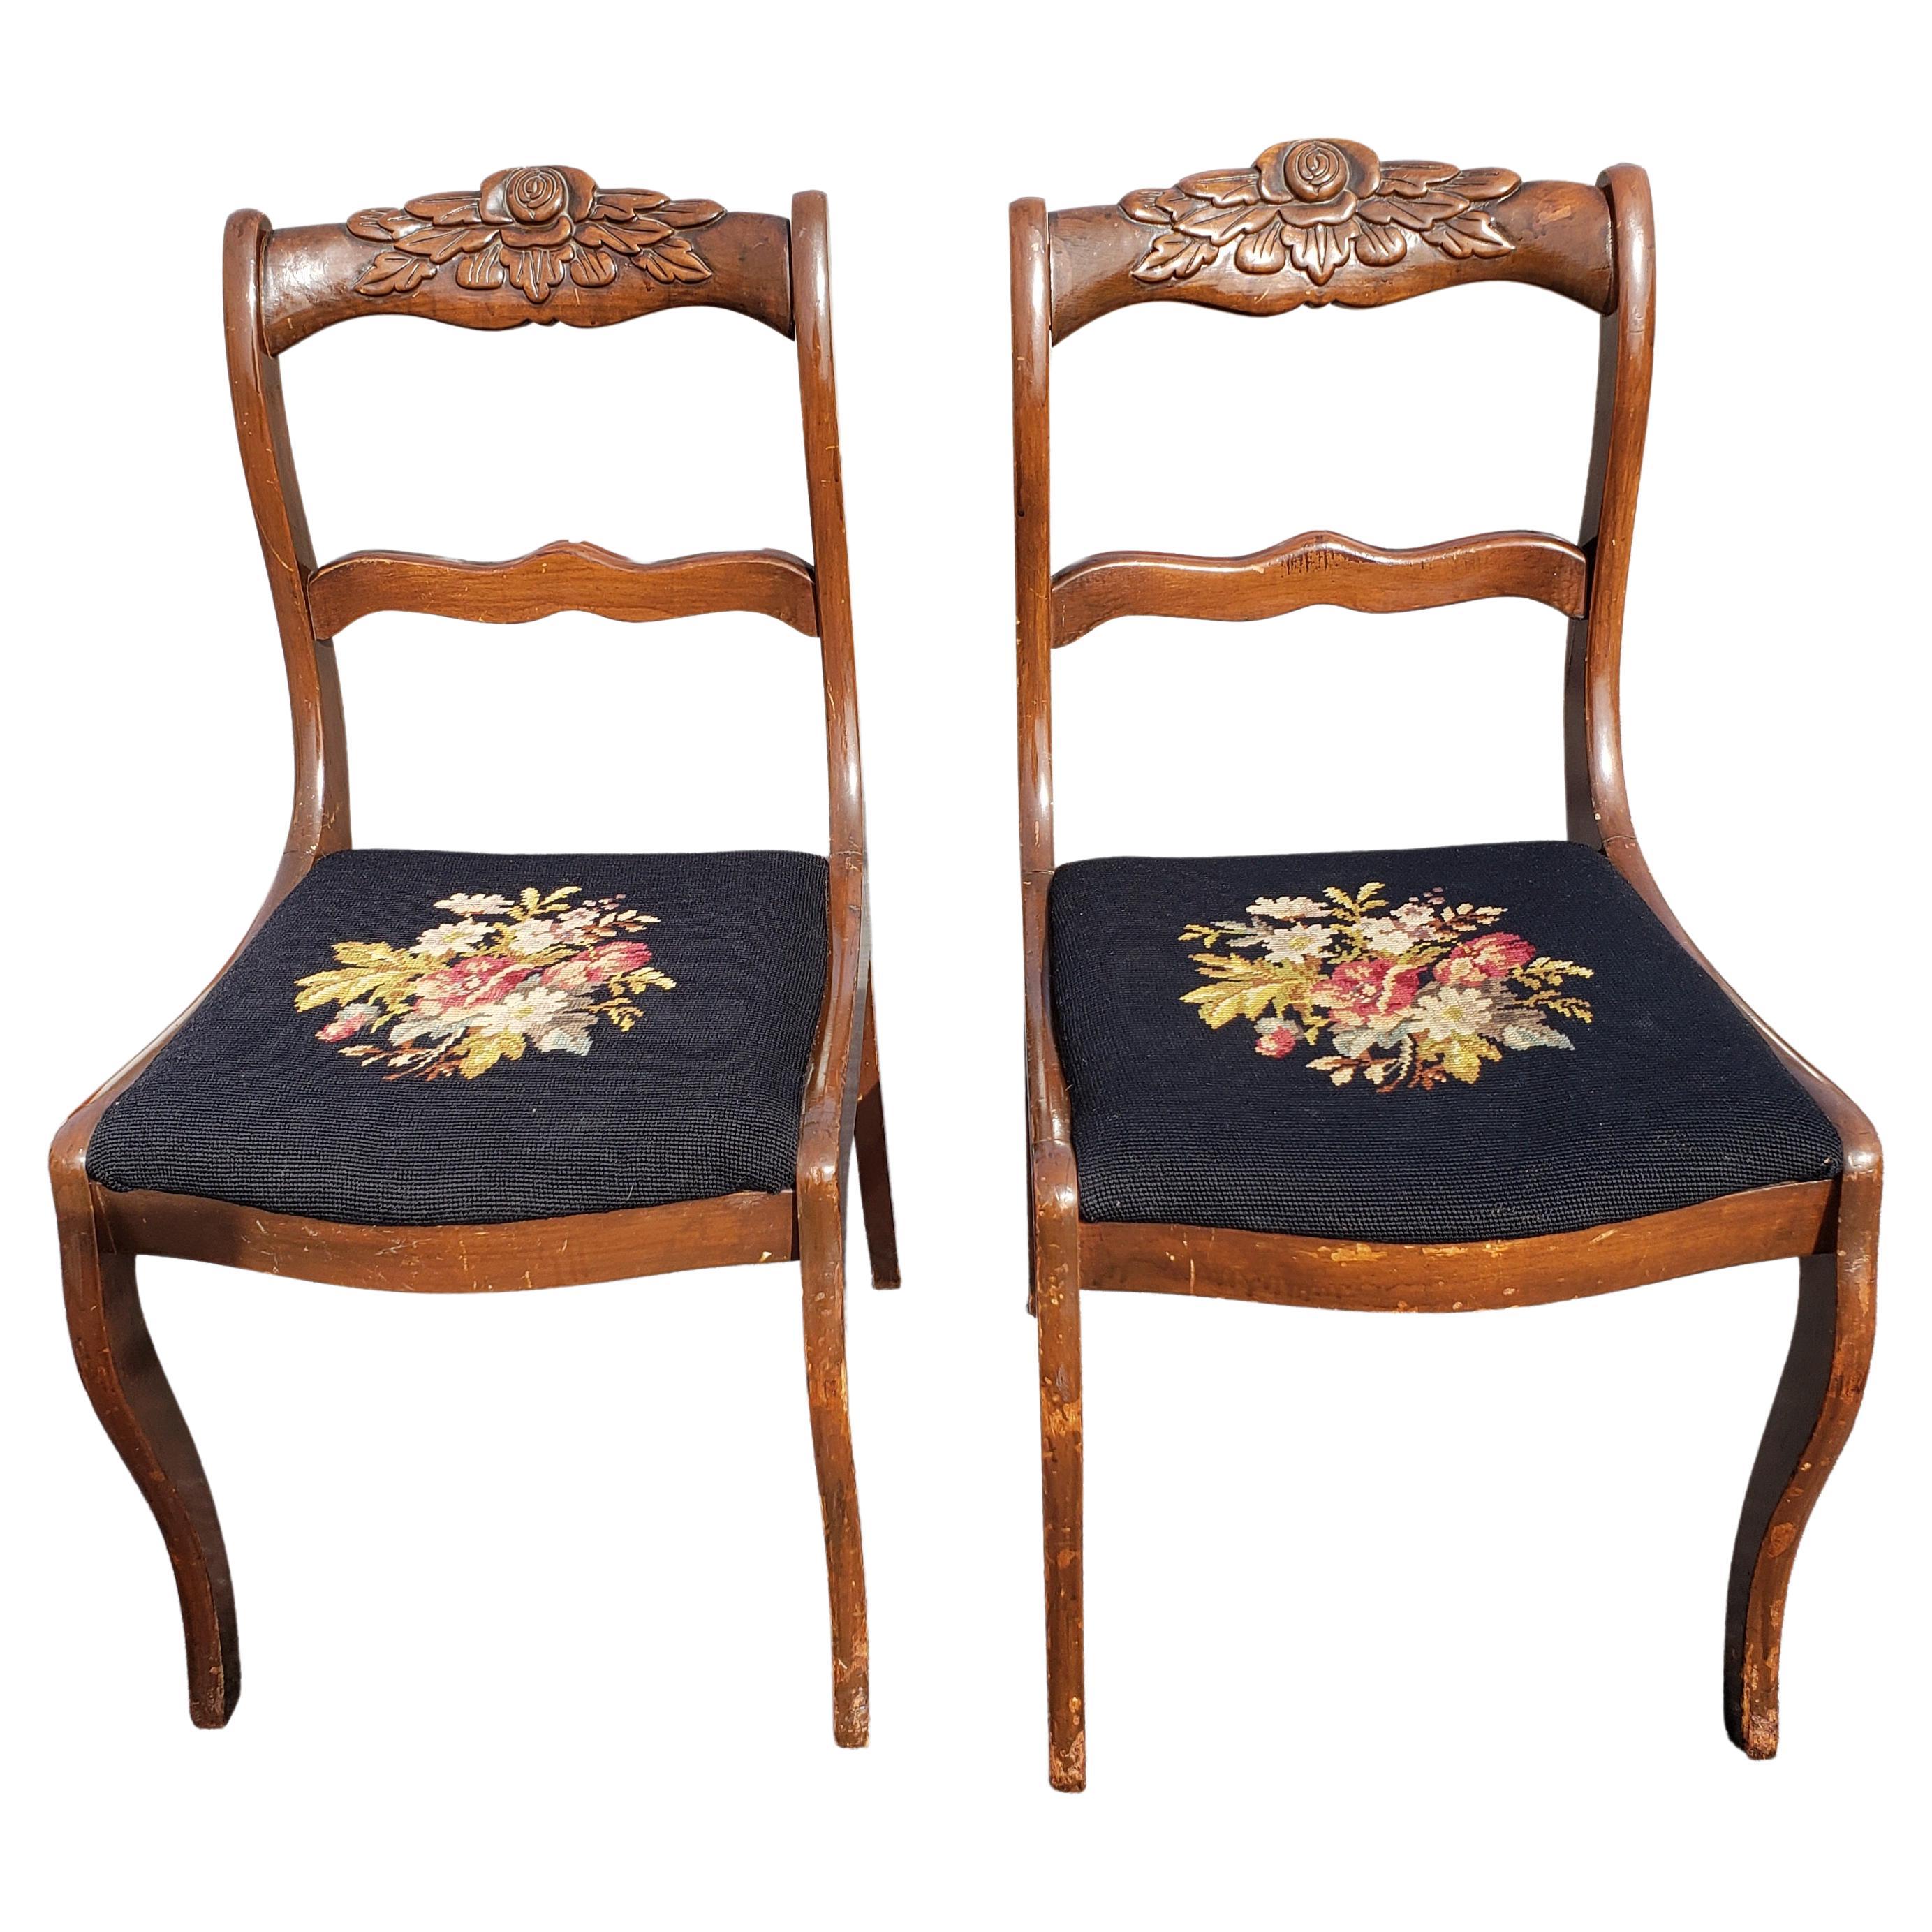 1940s Carved Ladder Back Needlepoint Seat Chairs, A pair For Sale